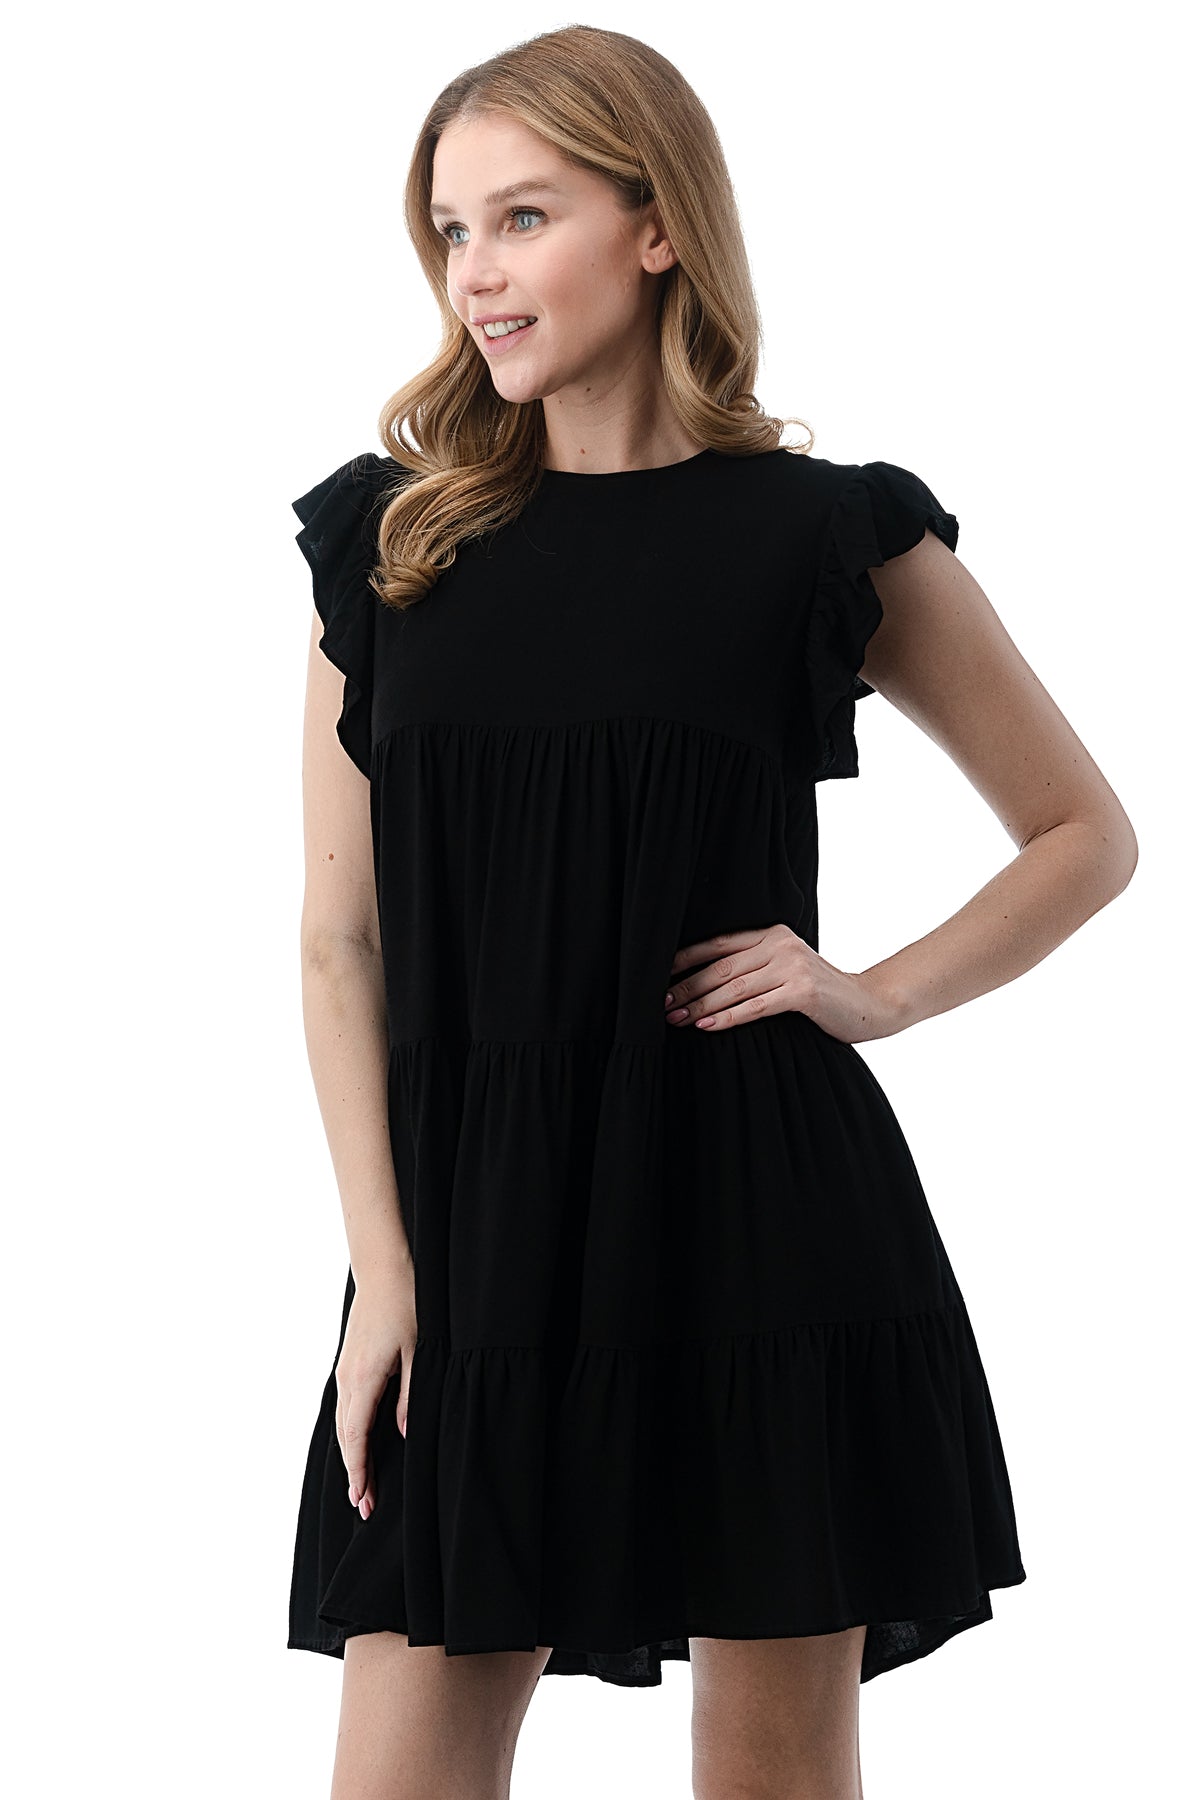 EDGY Land Girl's and Women's Butterfly Short Sleeve Round Neck Ruffled Above-Knee Dress with Shirring